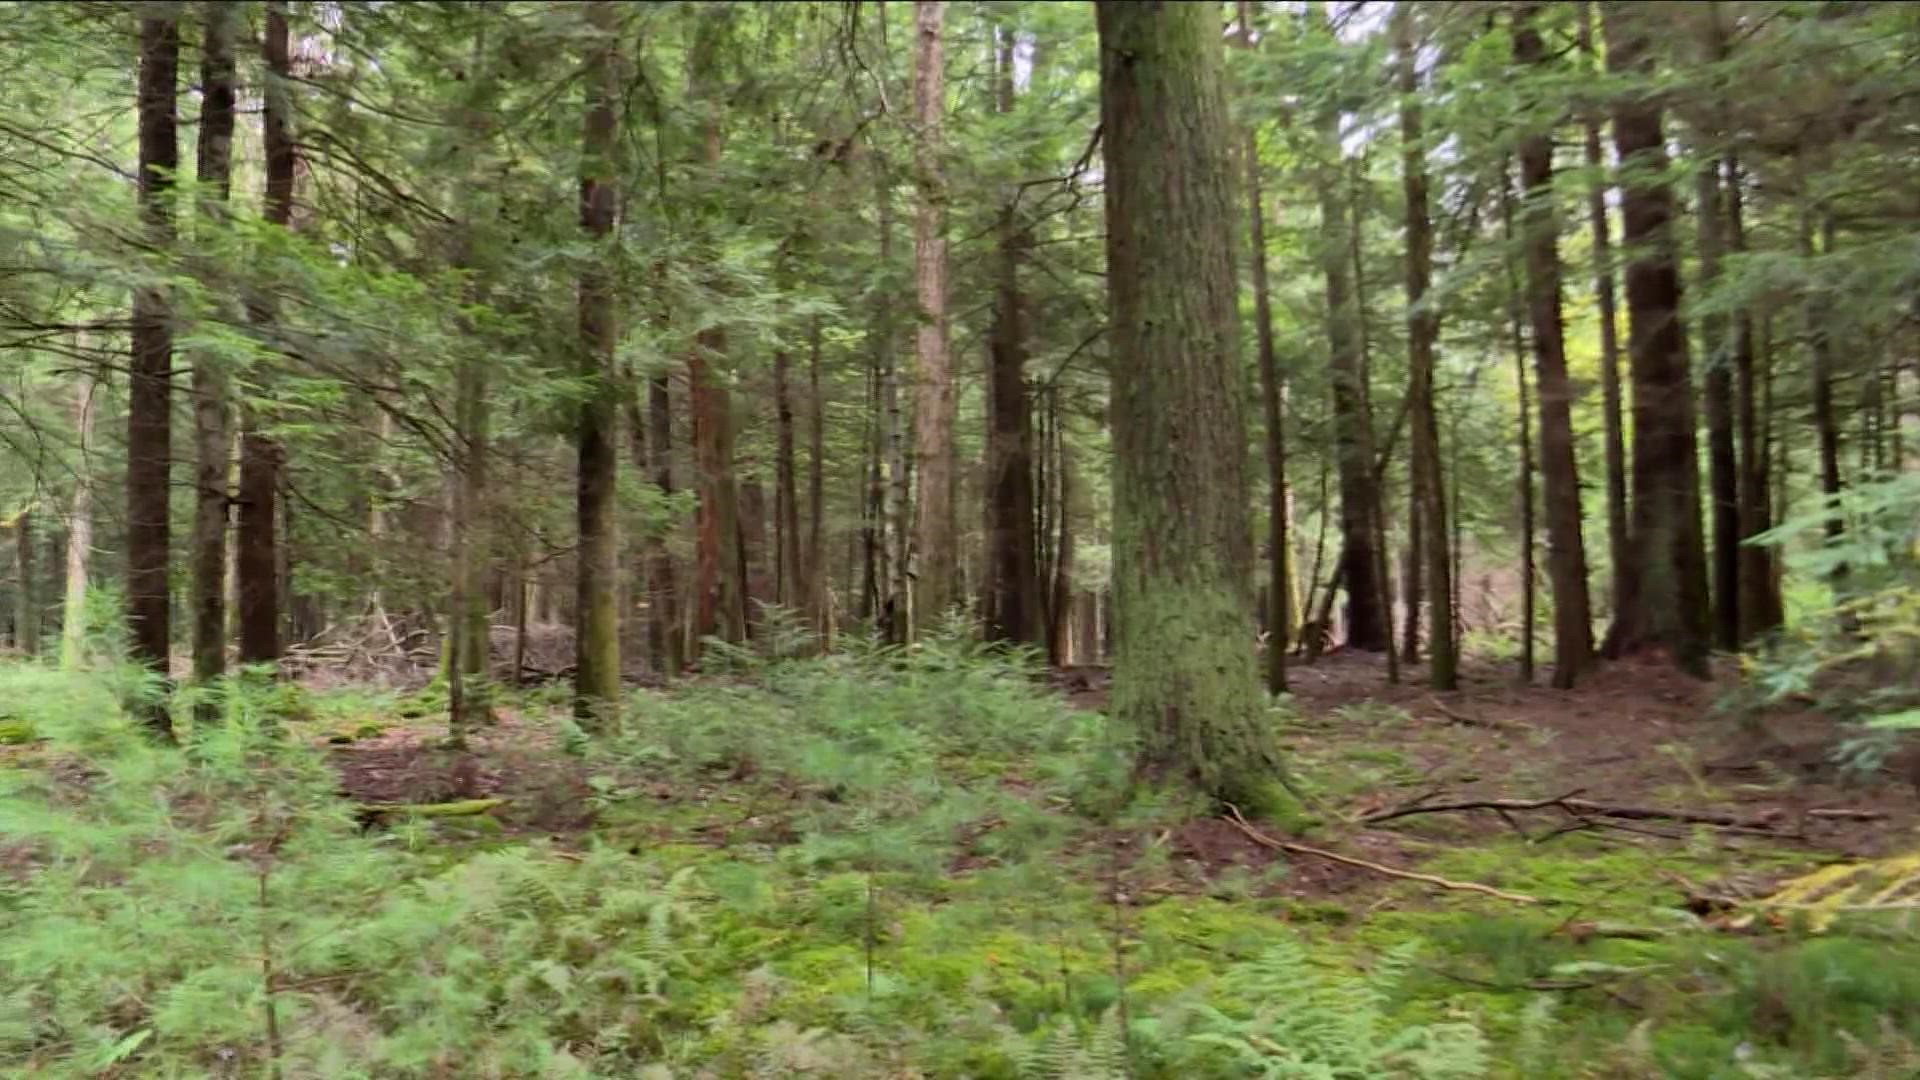 It takes a community to protect the environment. 
In Fredonia, two groups are working together to preserve an ancient woodland.